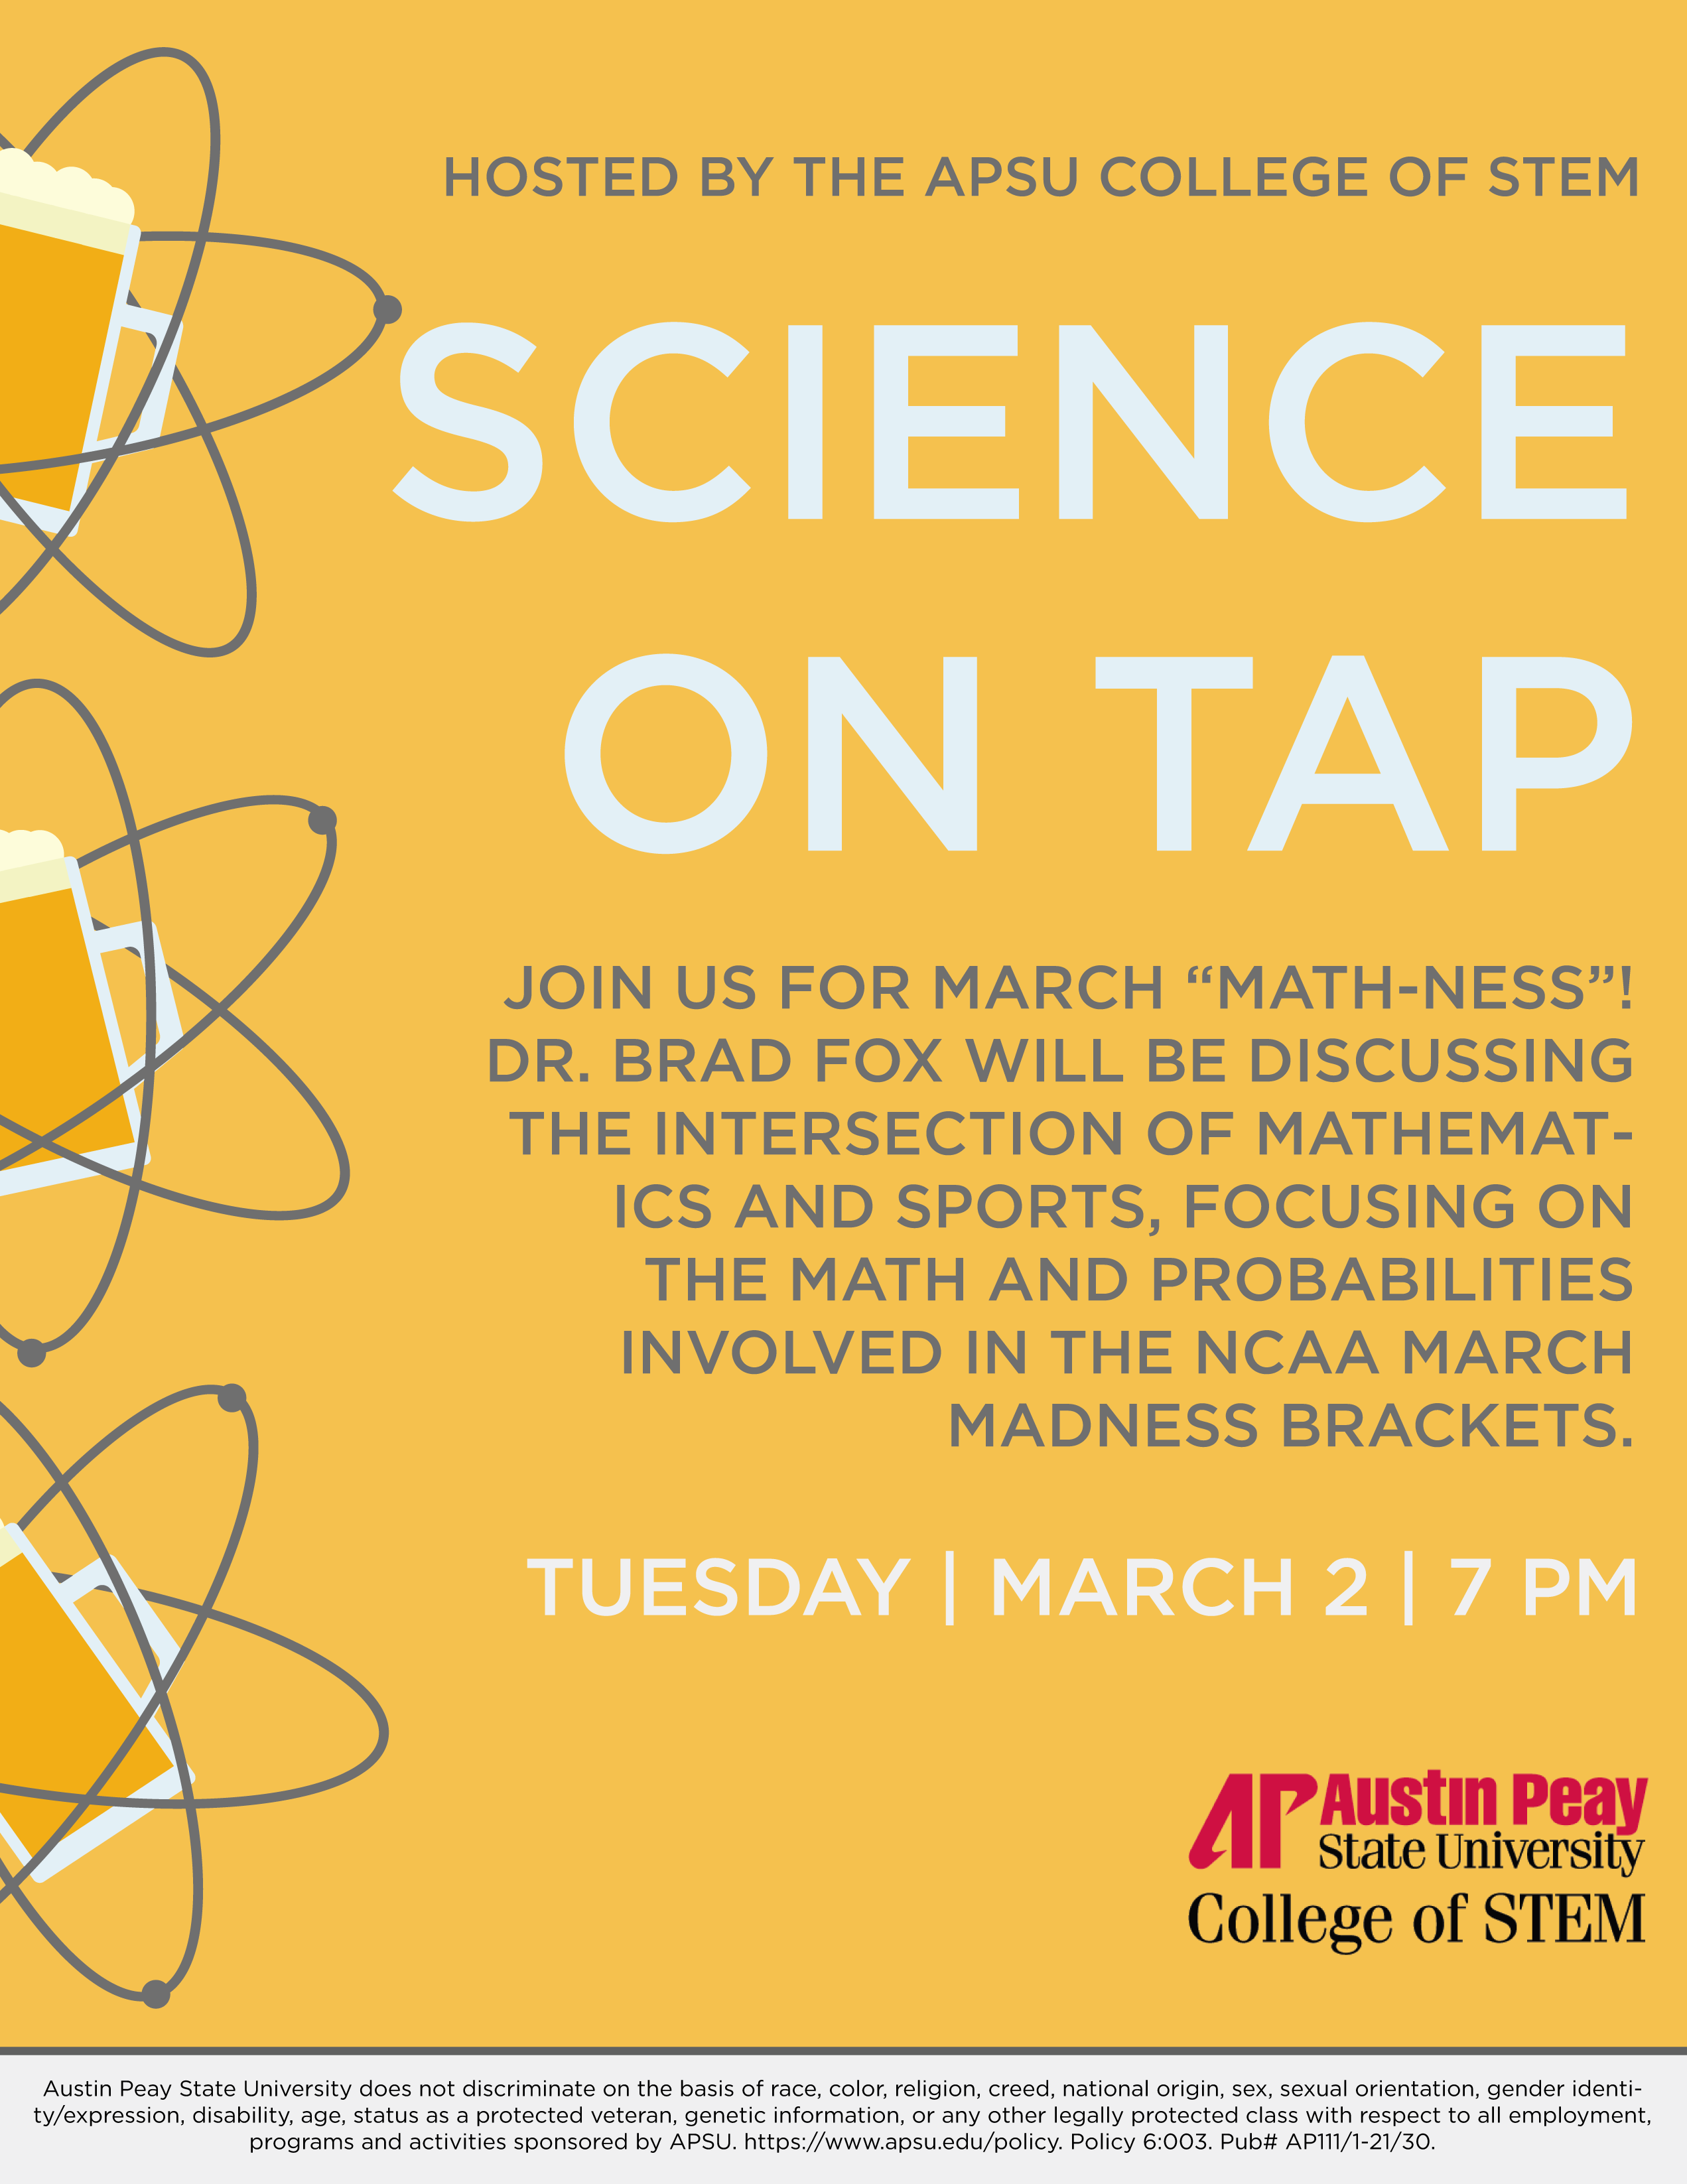 Austin Peay State University’s Science on Tap lecture series continues virtually on March 2 when Dr. Brad Fox will discuss March “Math-ness.”   The event will be at 7 p.m. and will be free and open to the public.   Fox – an associate professor of mathematics at Austin Peay – will explore the intersection of mathematics and sports, focusing on the math and probabilities involved in ranking sports teams and predicting the NCAA basketball March brackets.  For more information and for a link to the event, click here. Please note: The link to the Zoom event will not go live until the time of the event.   To learn more about Fox, click here.